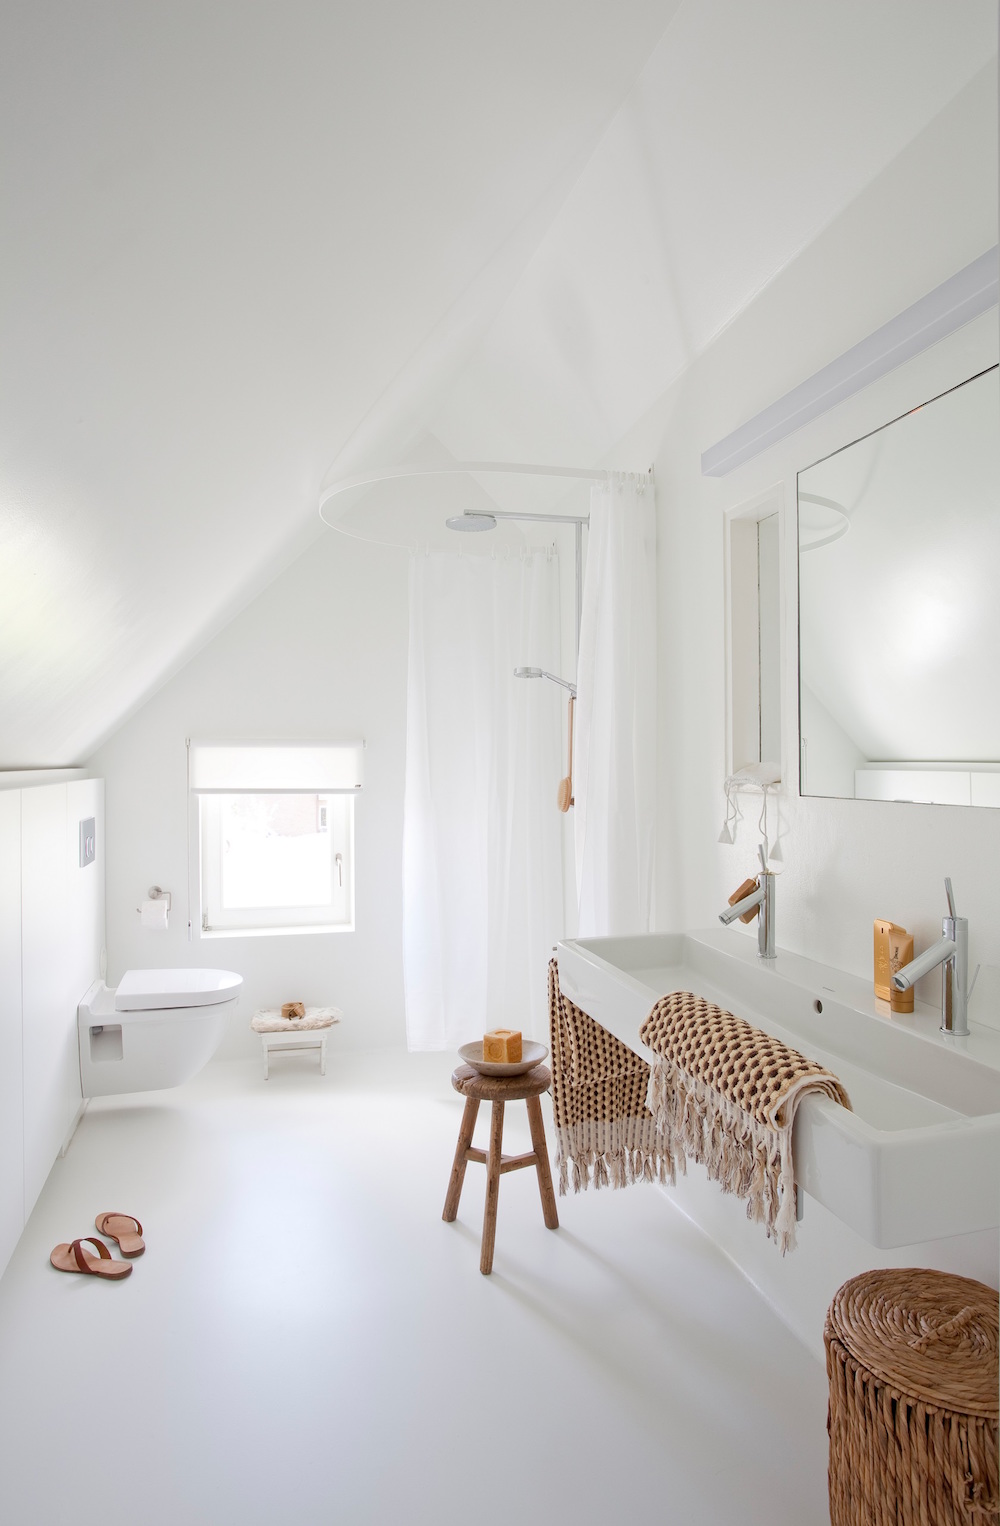 Image caption: Walls, floor, and ceiling, all consistently finished in white, blend with natural materials to create a pleasant ambience - with the large Vero double washbasin and Starck 3 toilet. | Image credit: Duravit